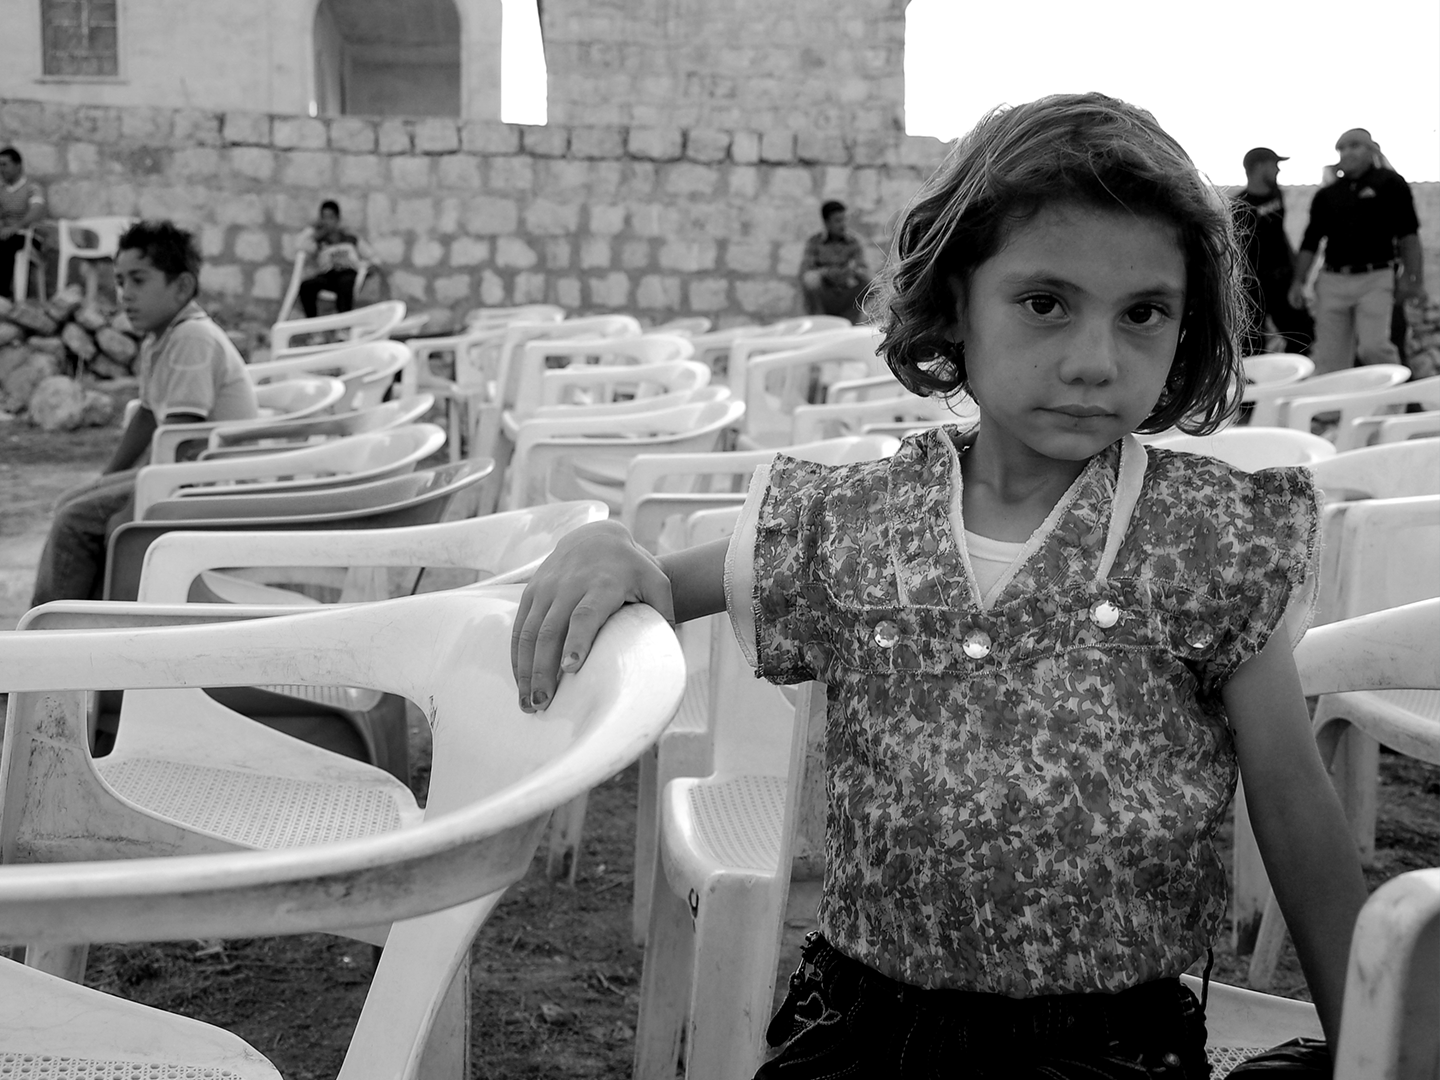 A girl affected by war in northern Syria